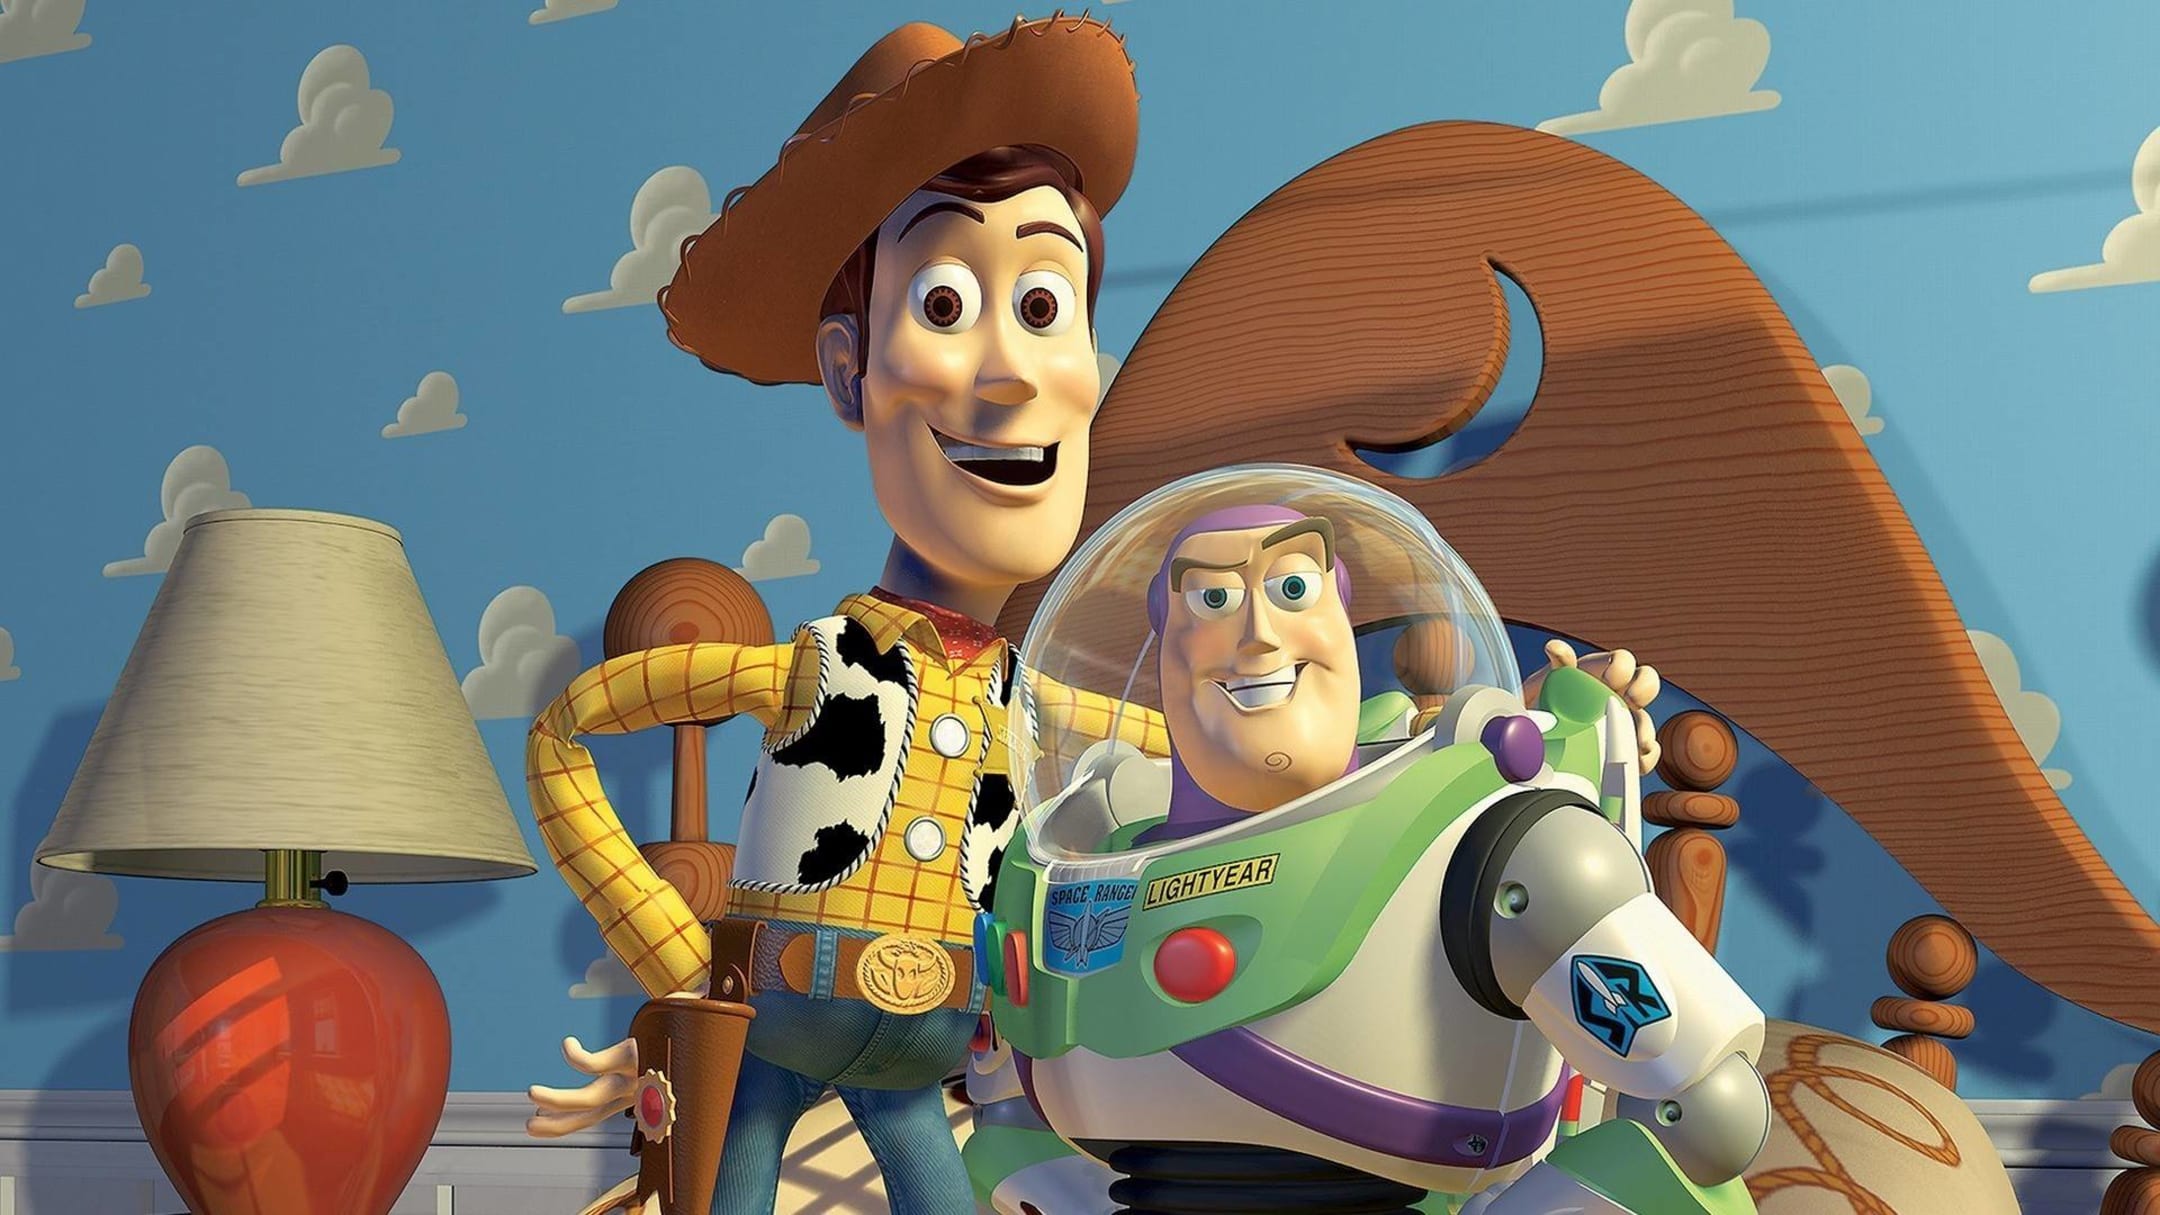 The 28 best animated movie franchises of all time | Yardbarker